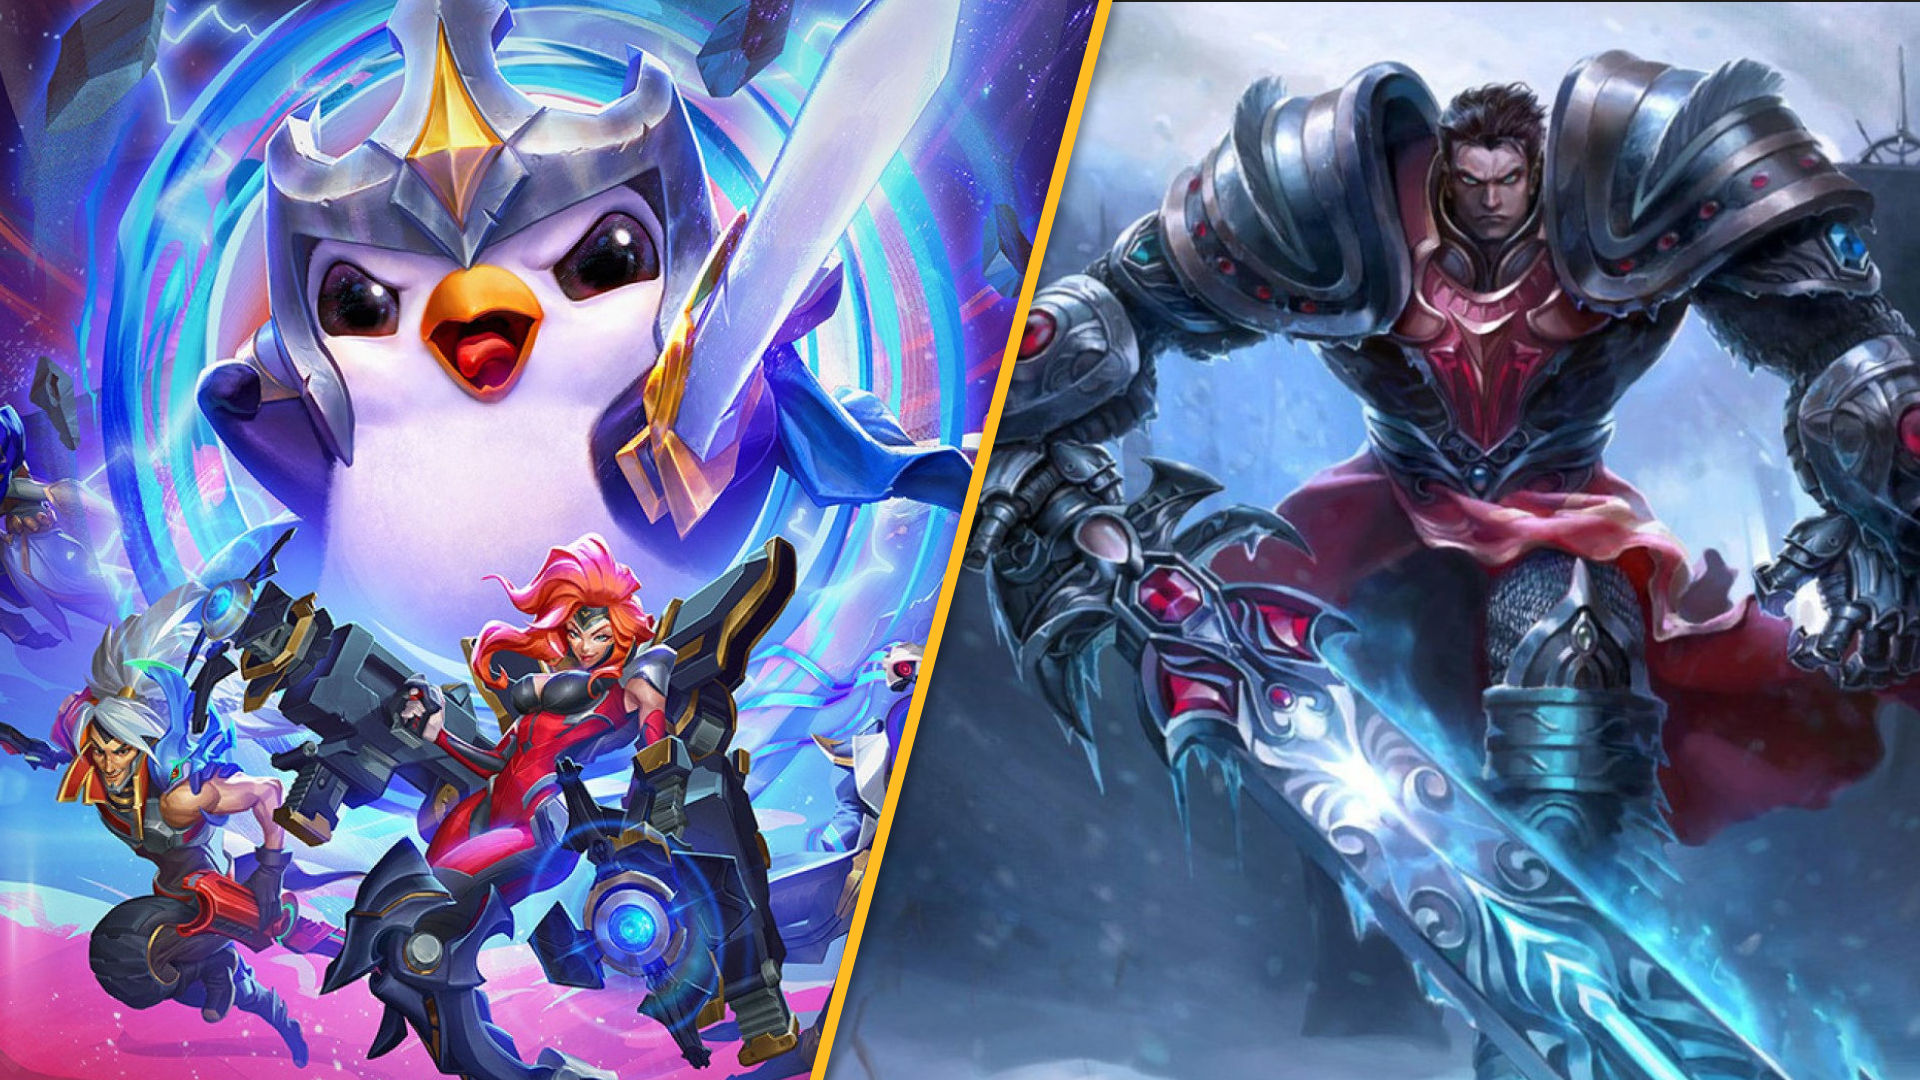 The best comps from the TFT Rising Legends Gizmos and Gadgets Finals